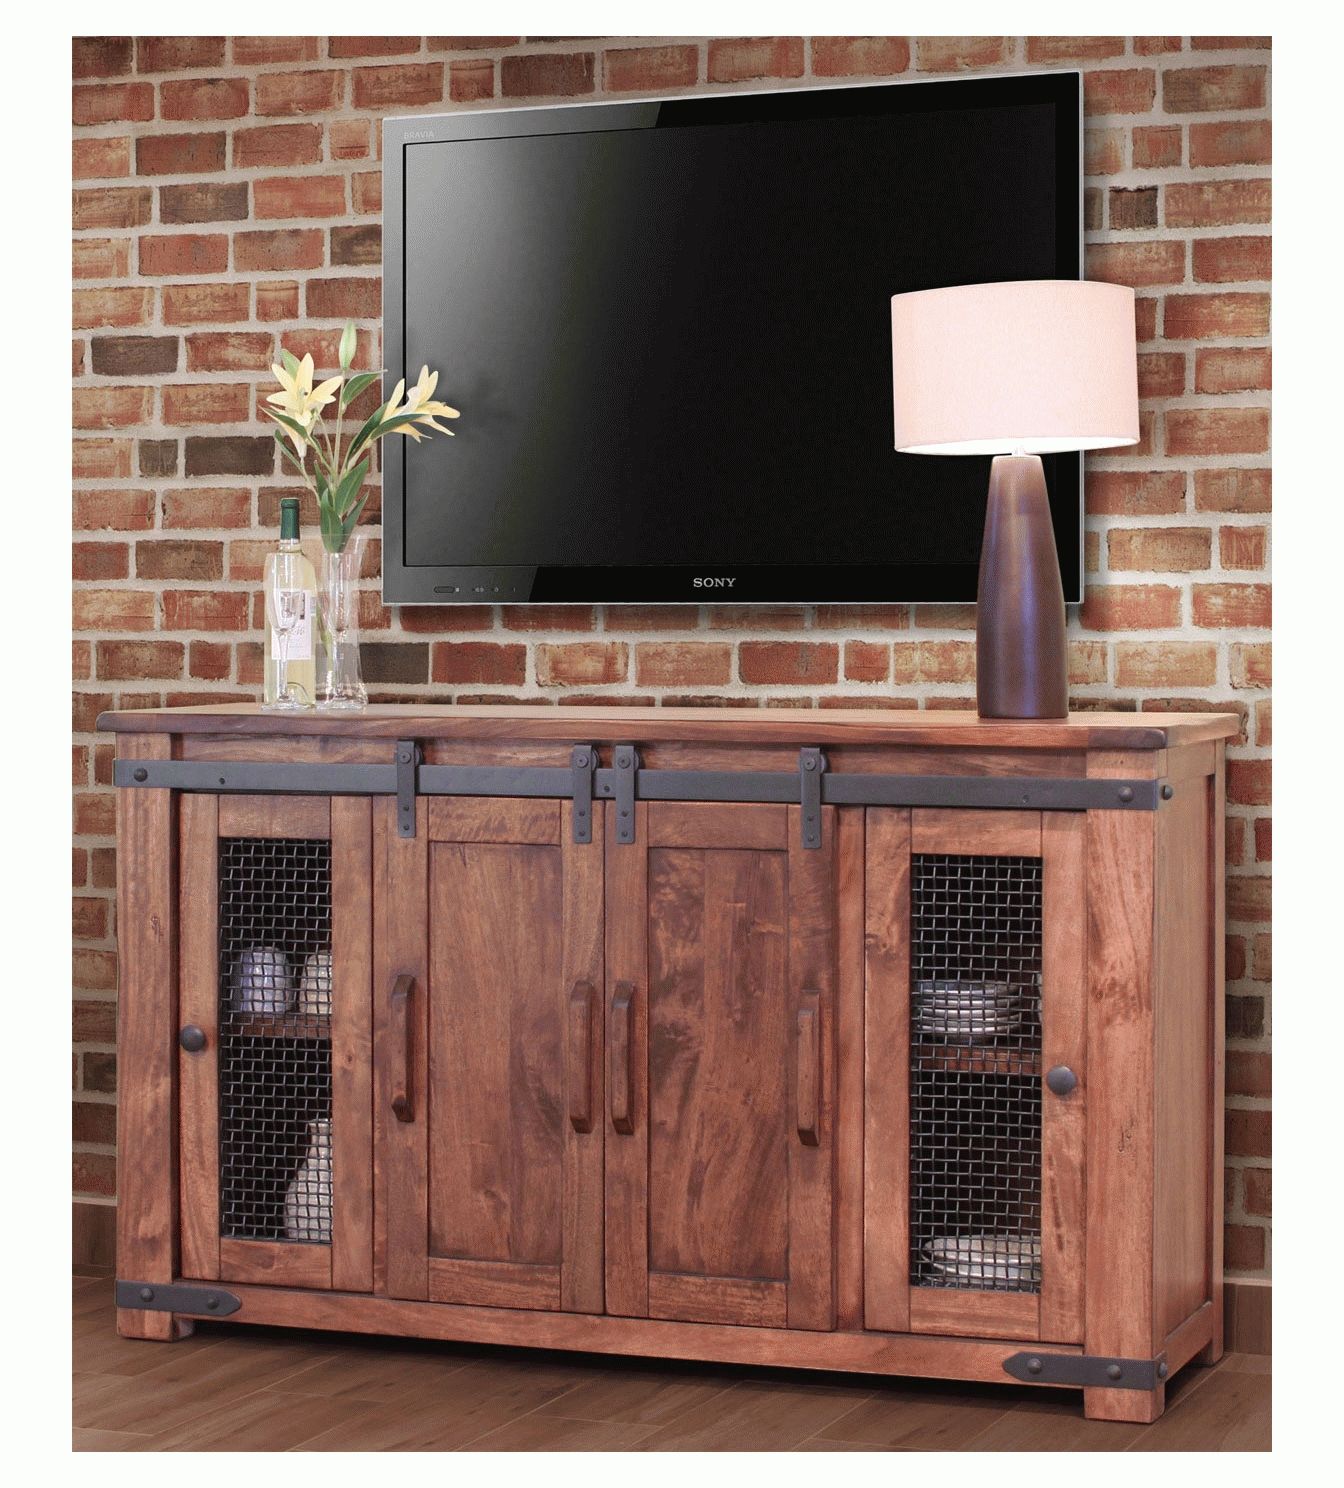 Rustic Barn Door Tv Stand, Barn Door Tv Stand, Barn Door Tv Console For Rustic Looking Tv Stands (View 4 of 15)